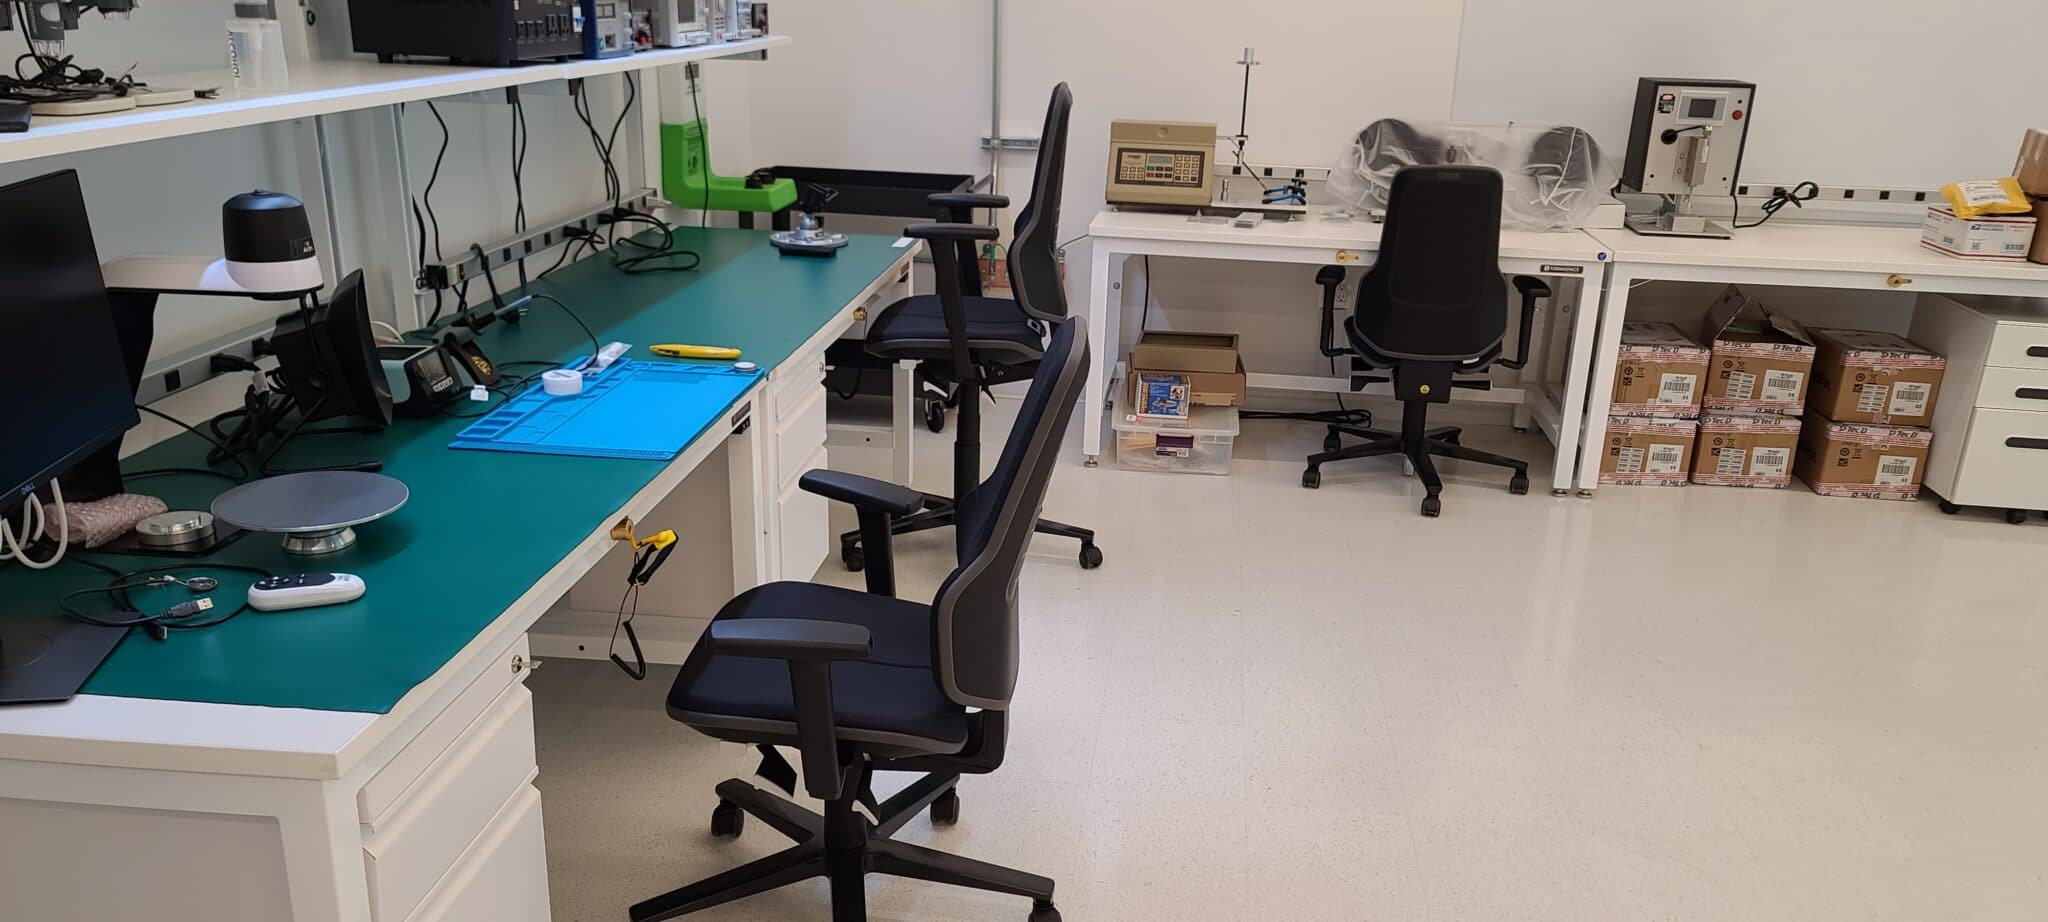 Photo of a laboratory with ESD flooring with some ESD chairs under the tables.